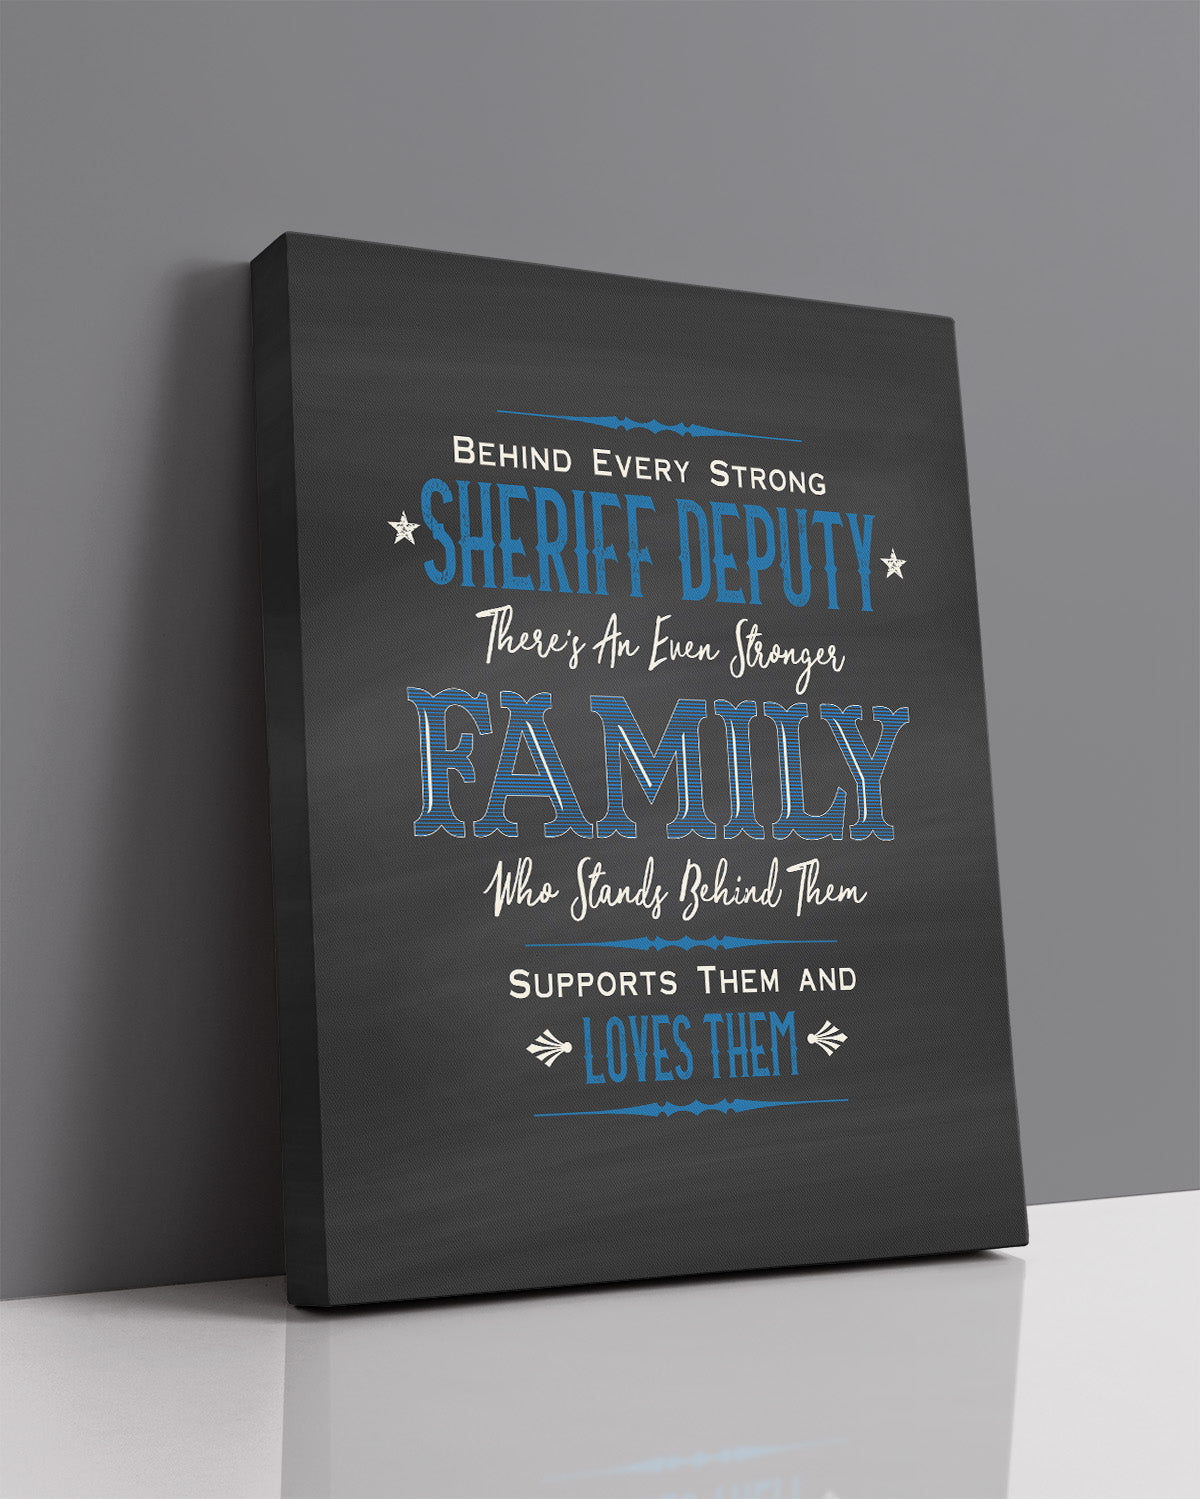 Behind Every Strong Sheriff - Law Enforcement Prints - Police Officer Gifts from Family - Police Hero Gift - Police Officer Wall Decor - Family Wall Art Gift to Sheriff